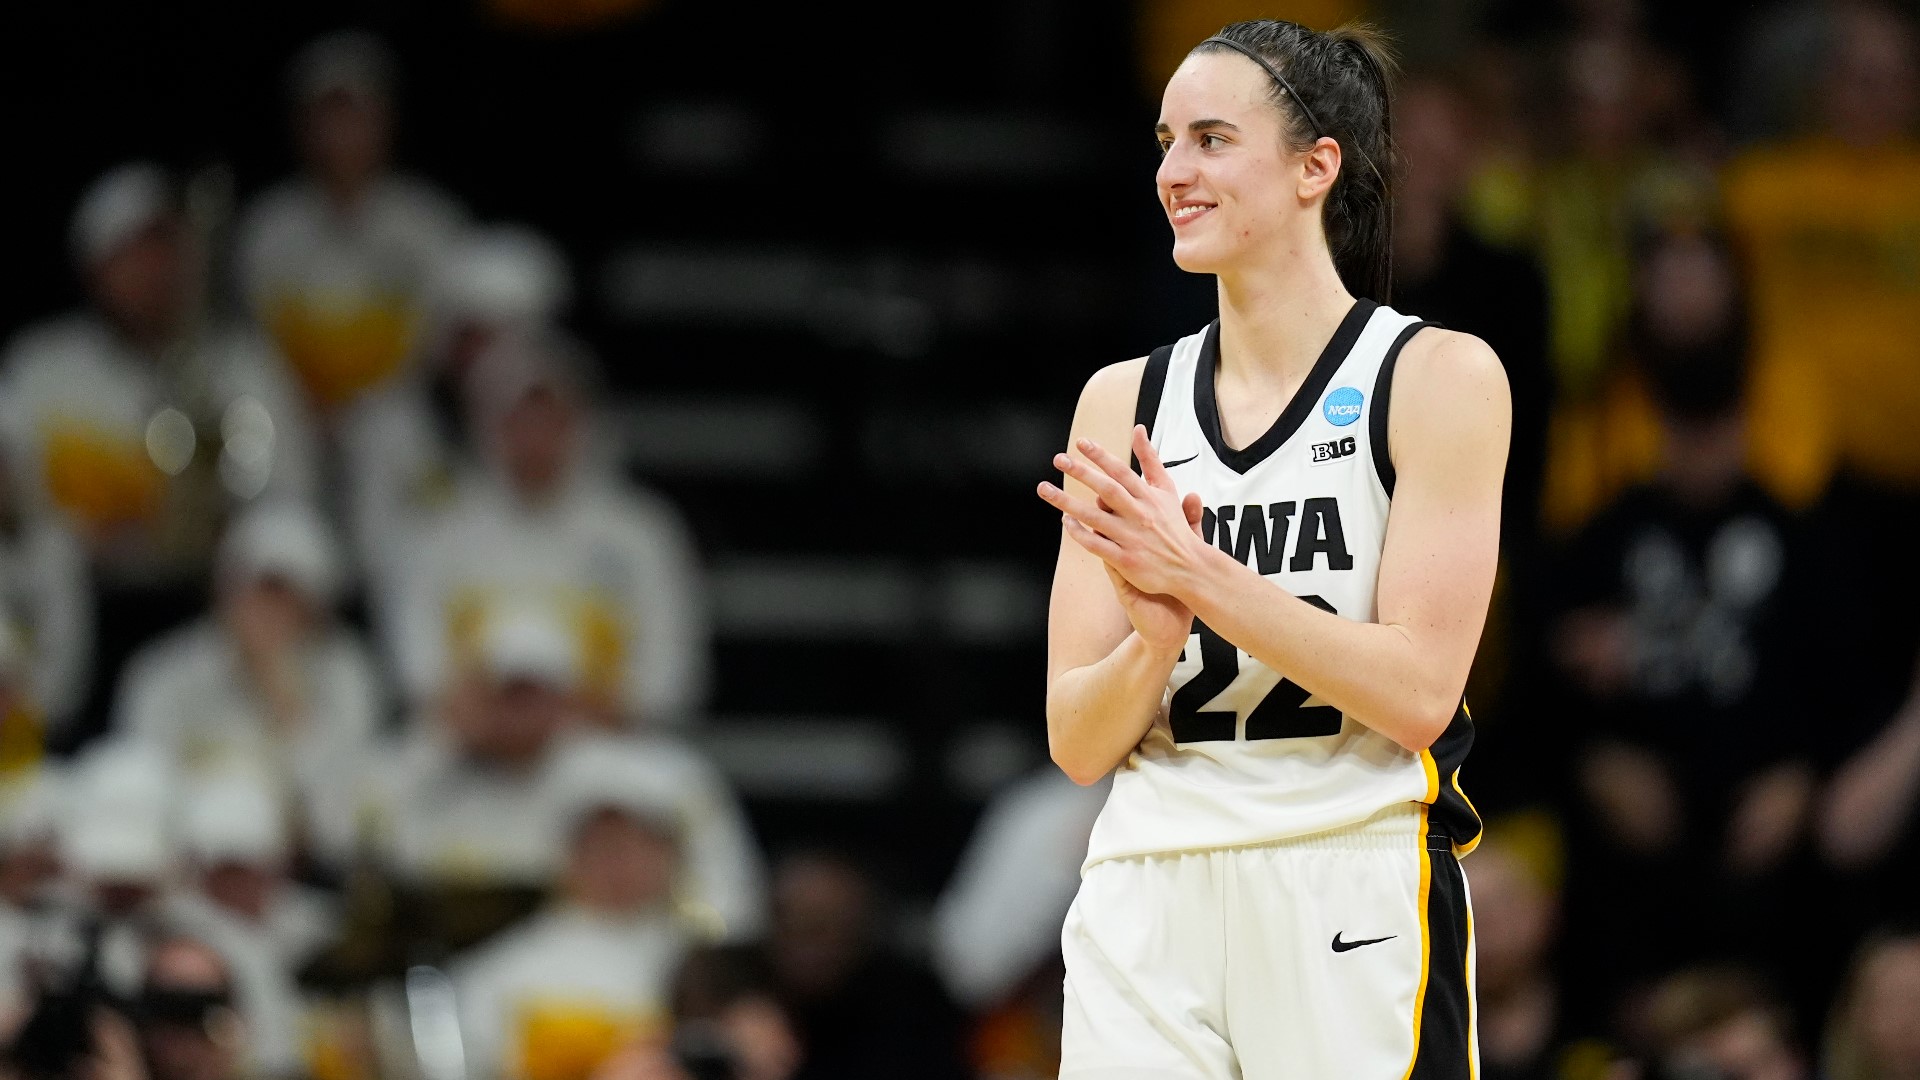 Caitlin Clark won the John R. Wooden Award for the second straight year as the nation’s top women’s college basketball player on Tuesday.